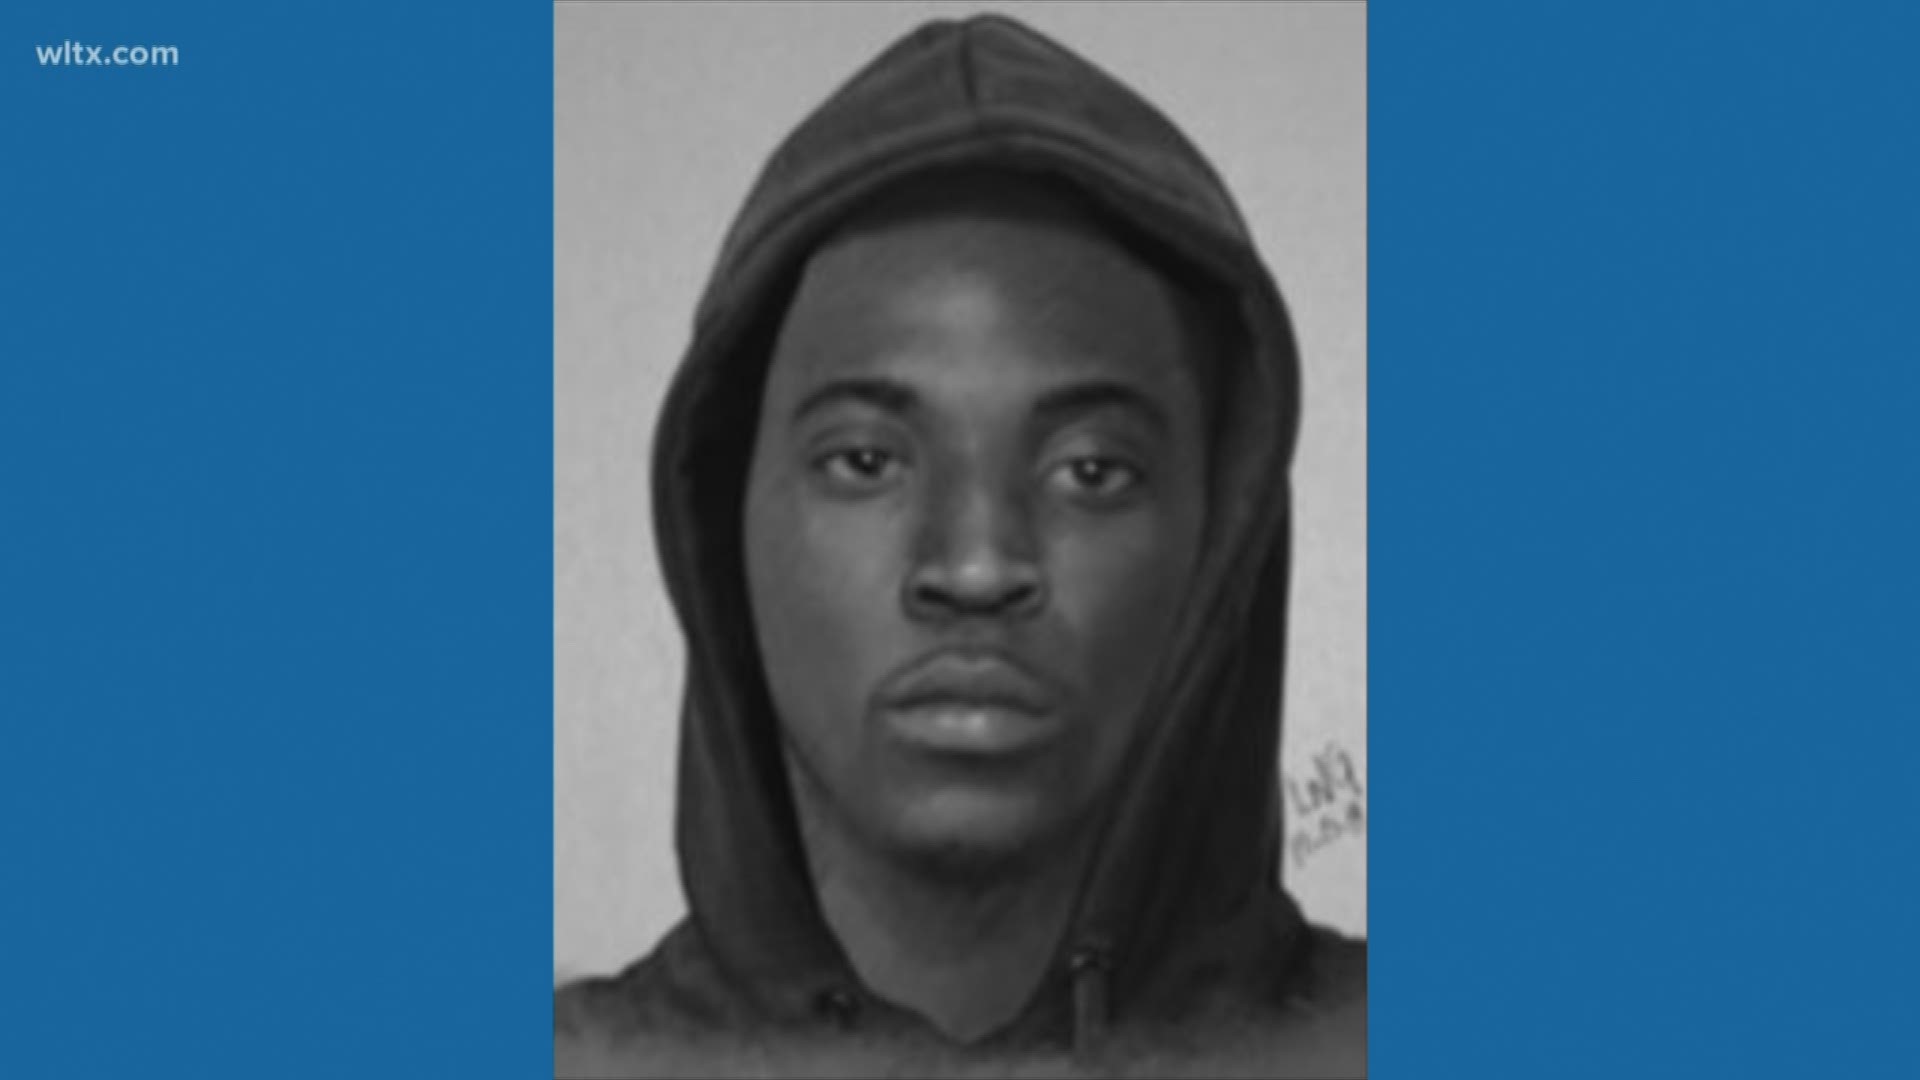 Columbia Police have released a sketch of a possible suspect in a shooting at the Reserve at Riverwalk Apartments.